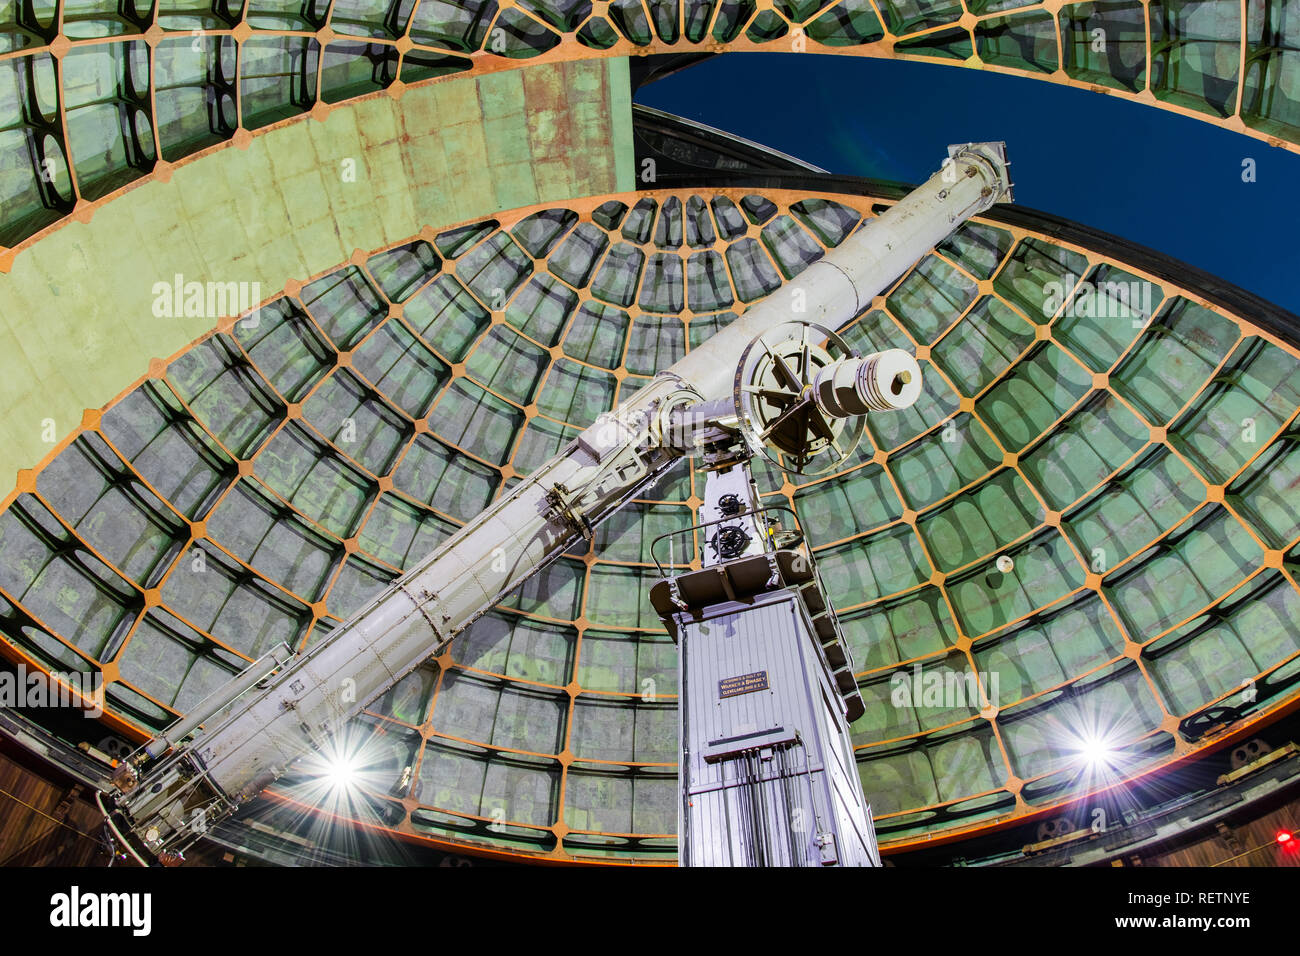 May 19, 2018 San Jose / CA / USA - The historical 36-inch Shane telescope at Lick Observatory, Mount Hamilton ready for night sky viewing; San Jose, s Stock Photo